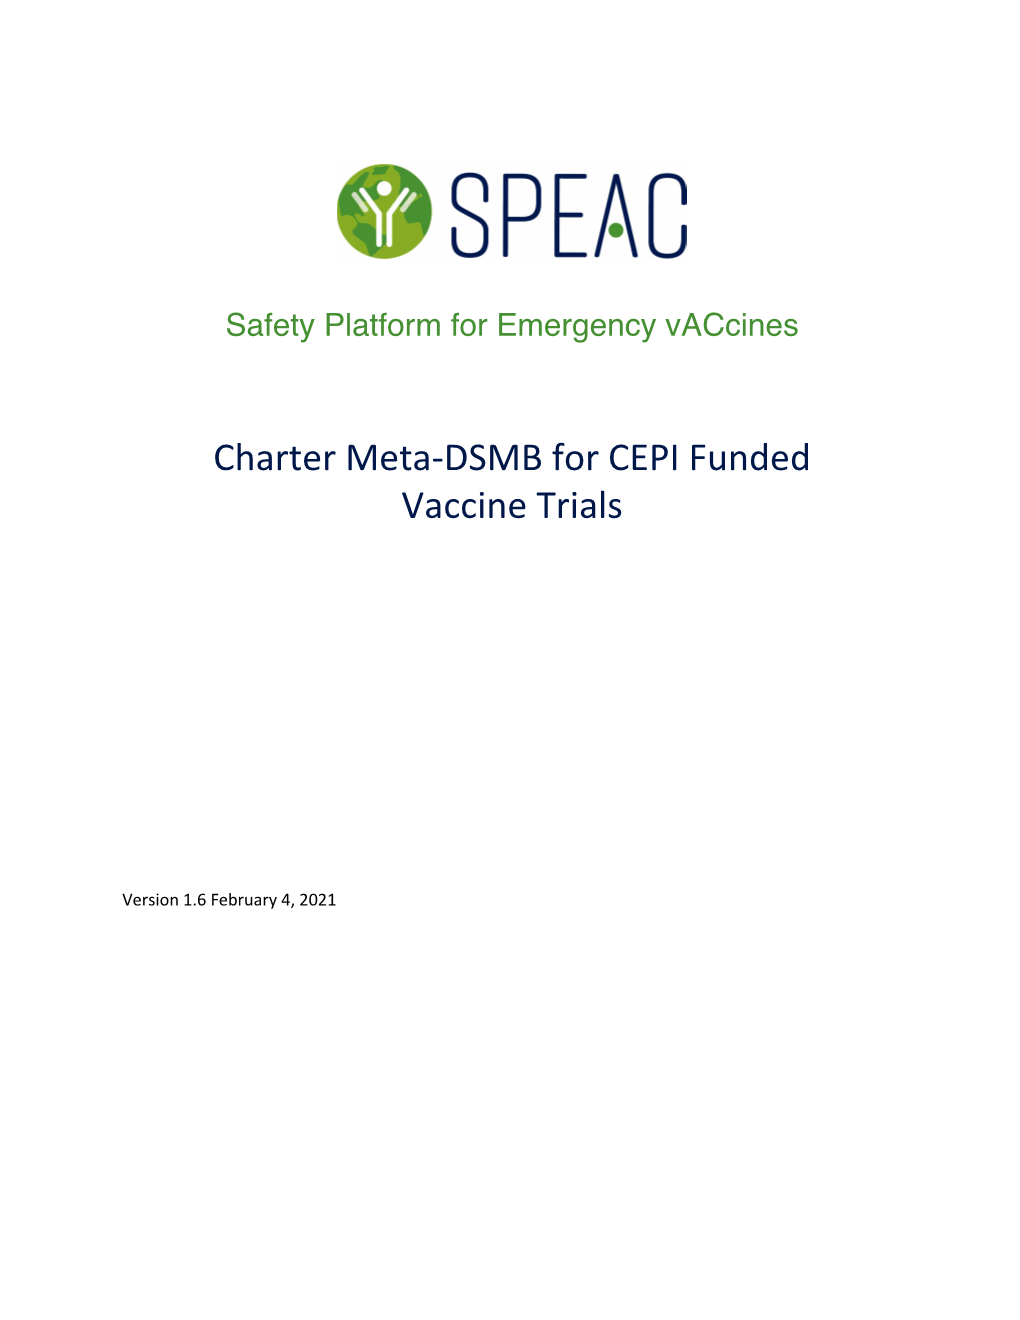 Charter Meta-DSMB for CEPI Funded Vaccine Trials